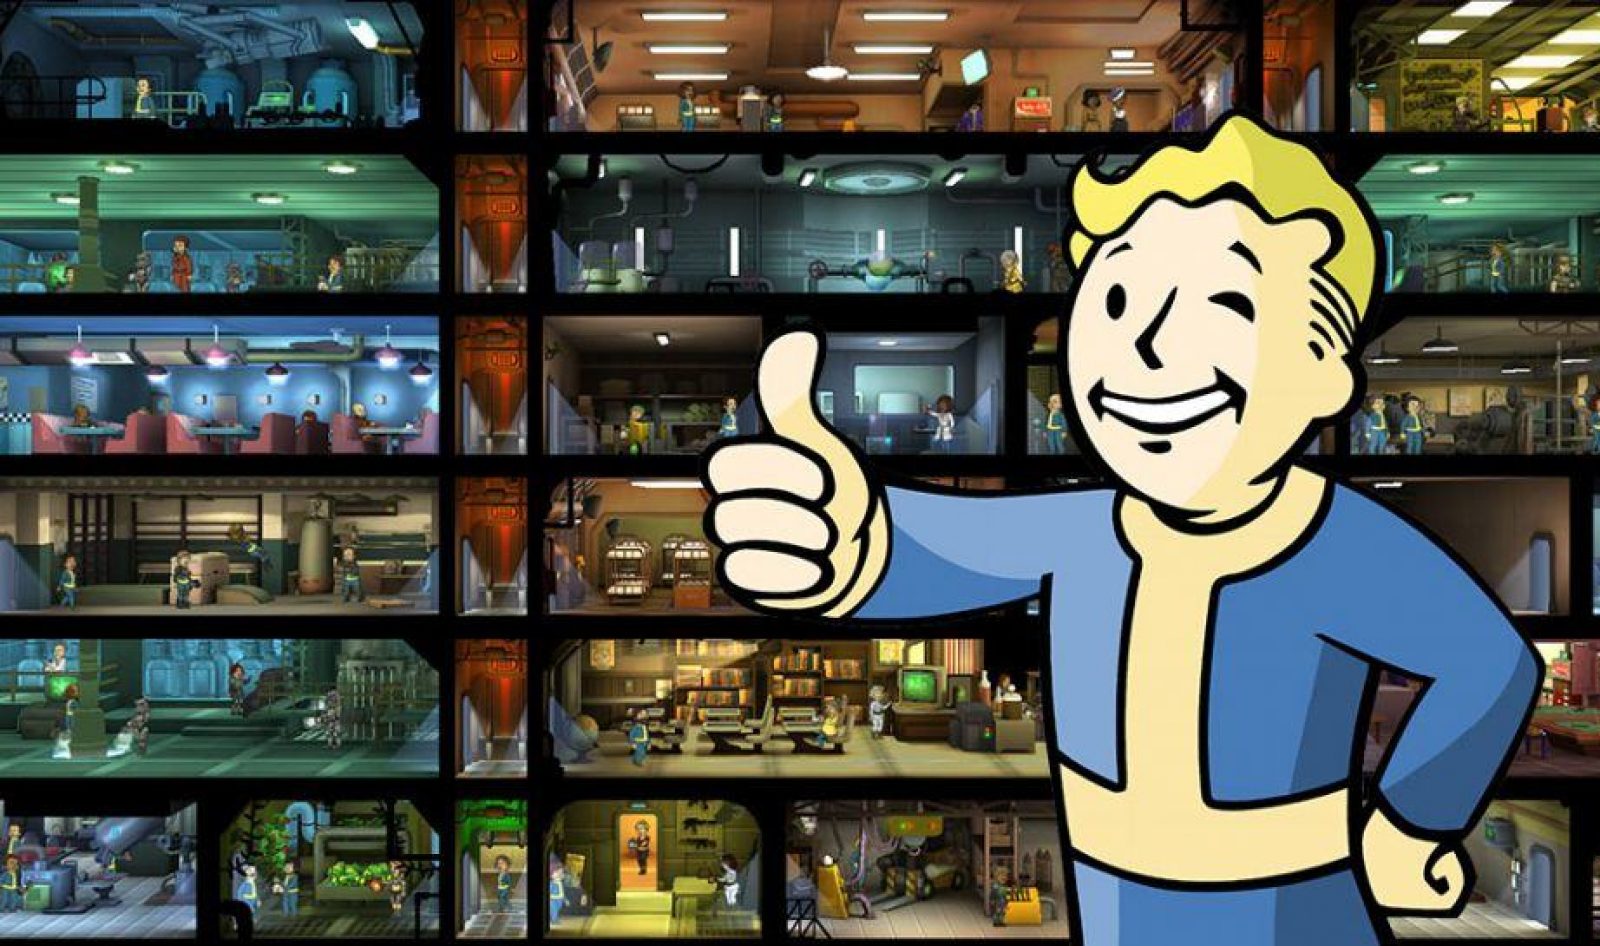 fallout shelter game download pc